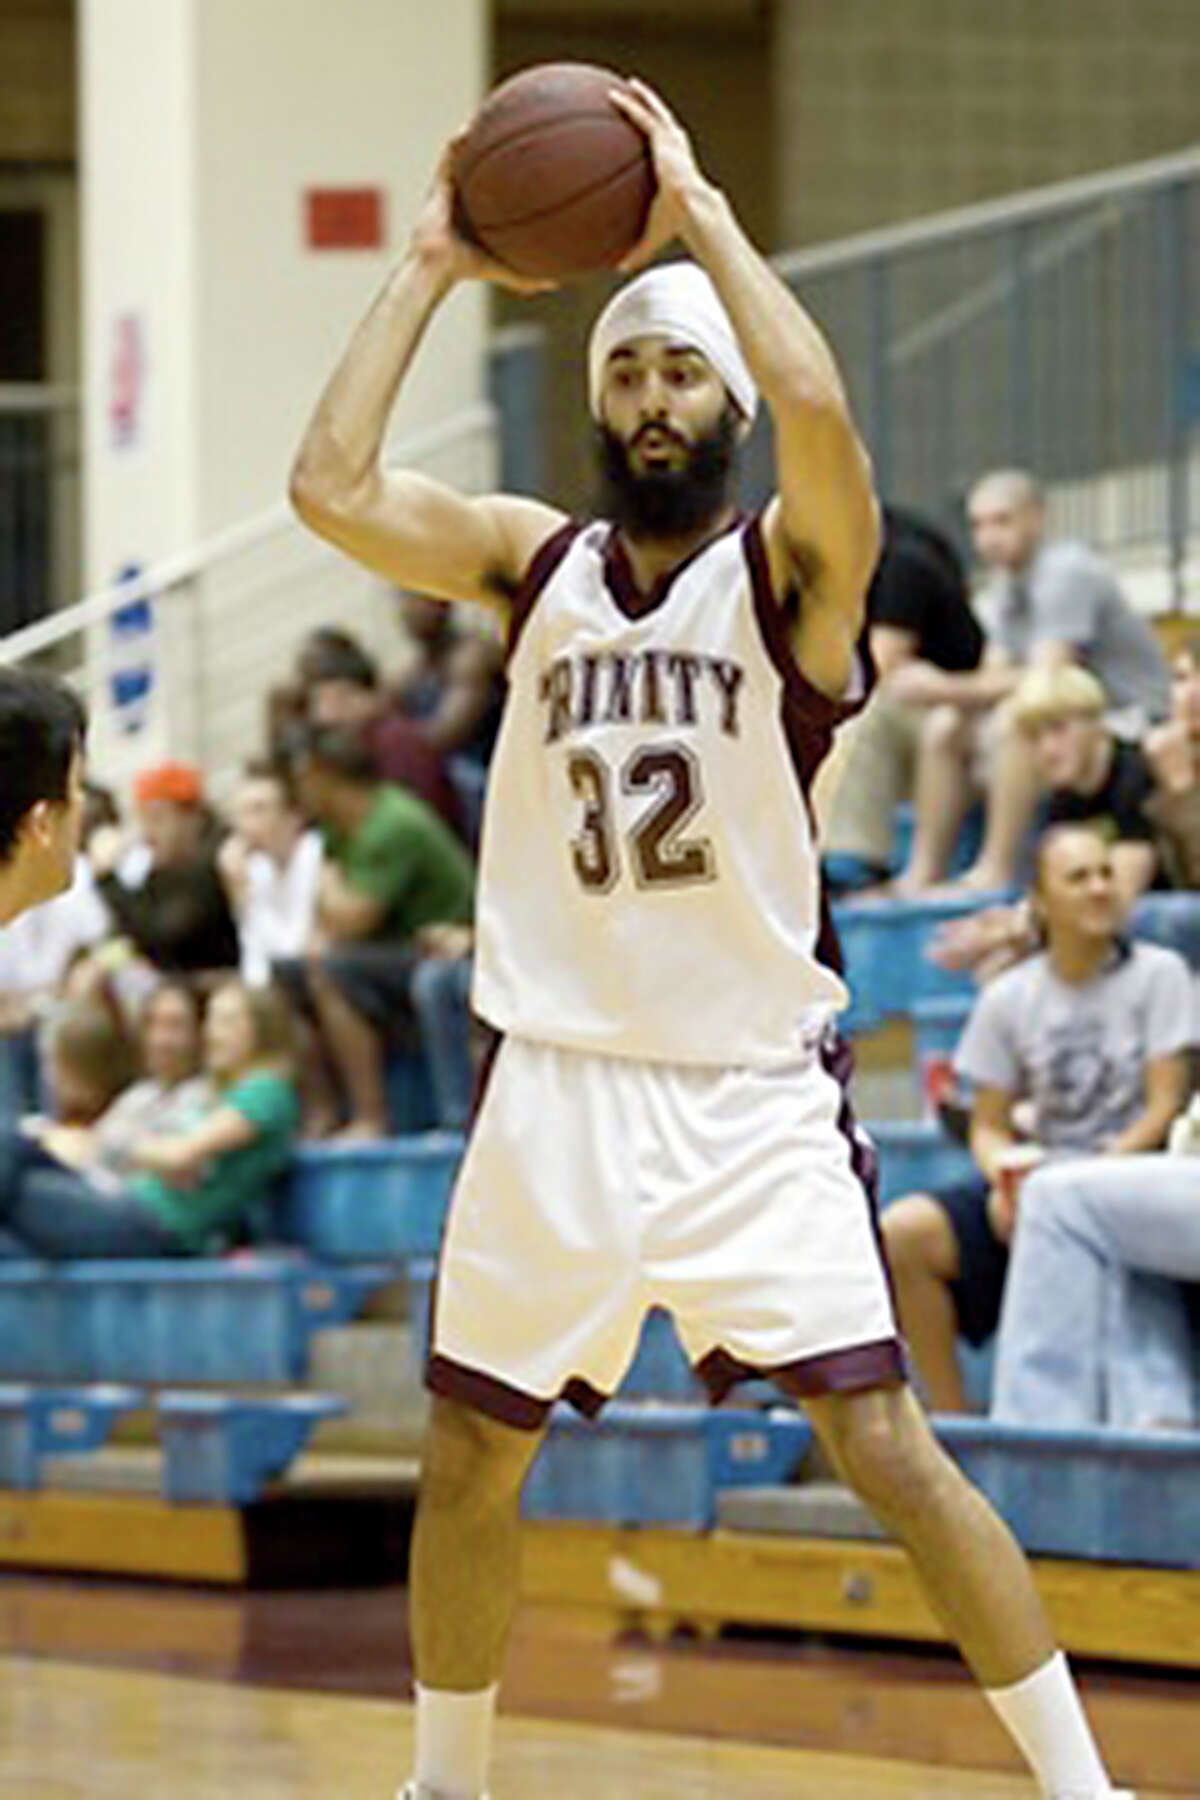 Darsh Preet Singh, 27, the first turbaned Sikh basketball player to play in the NCAA while he was at Trinity University.